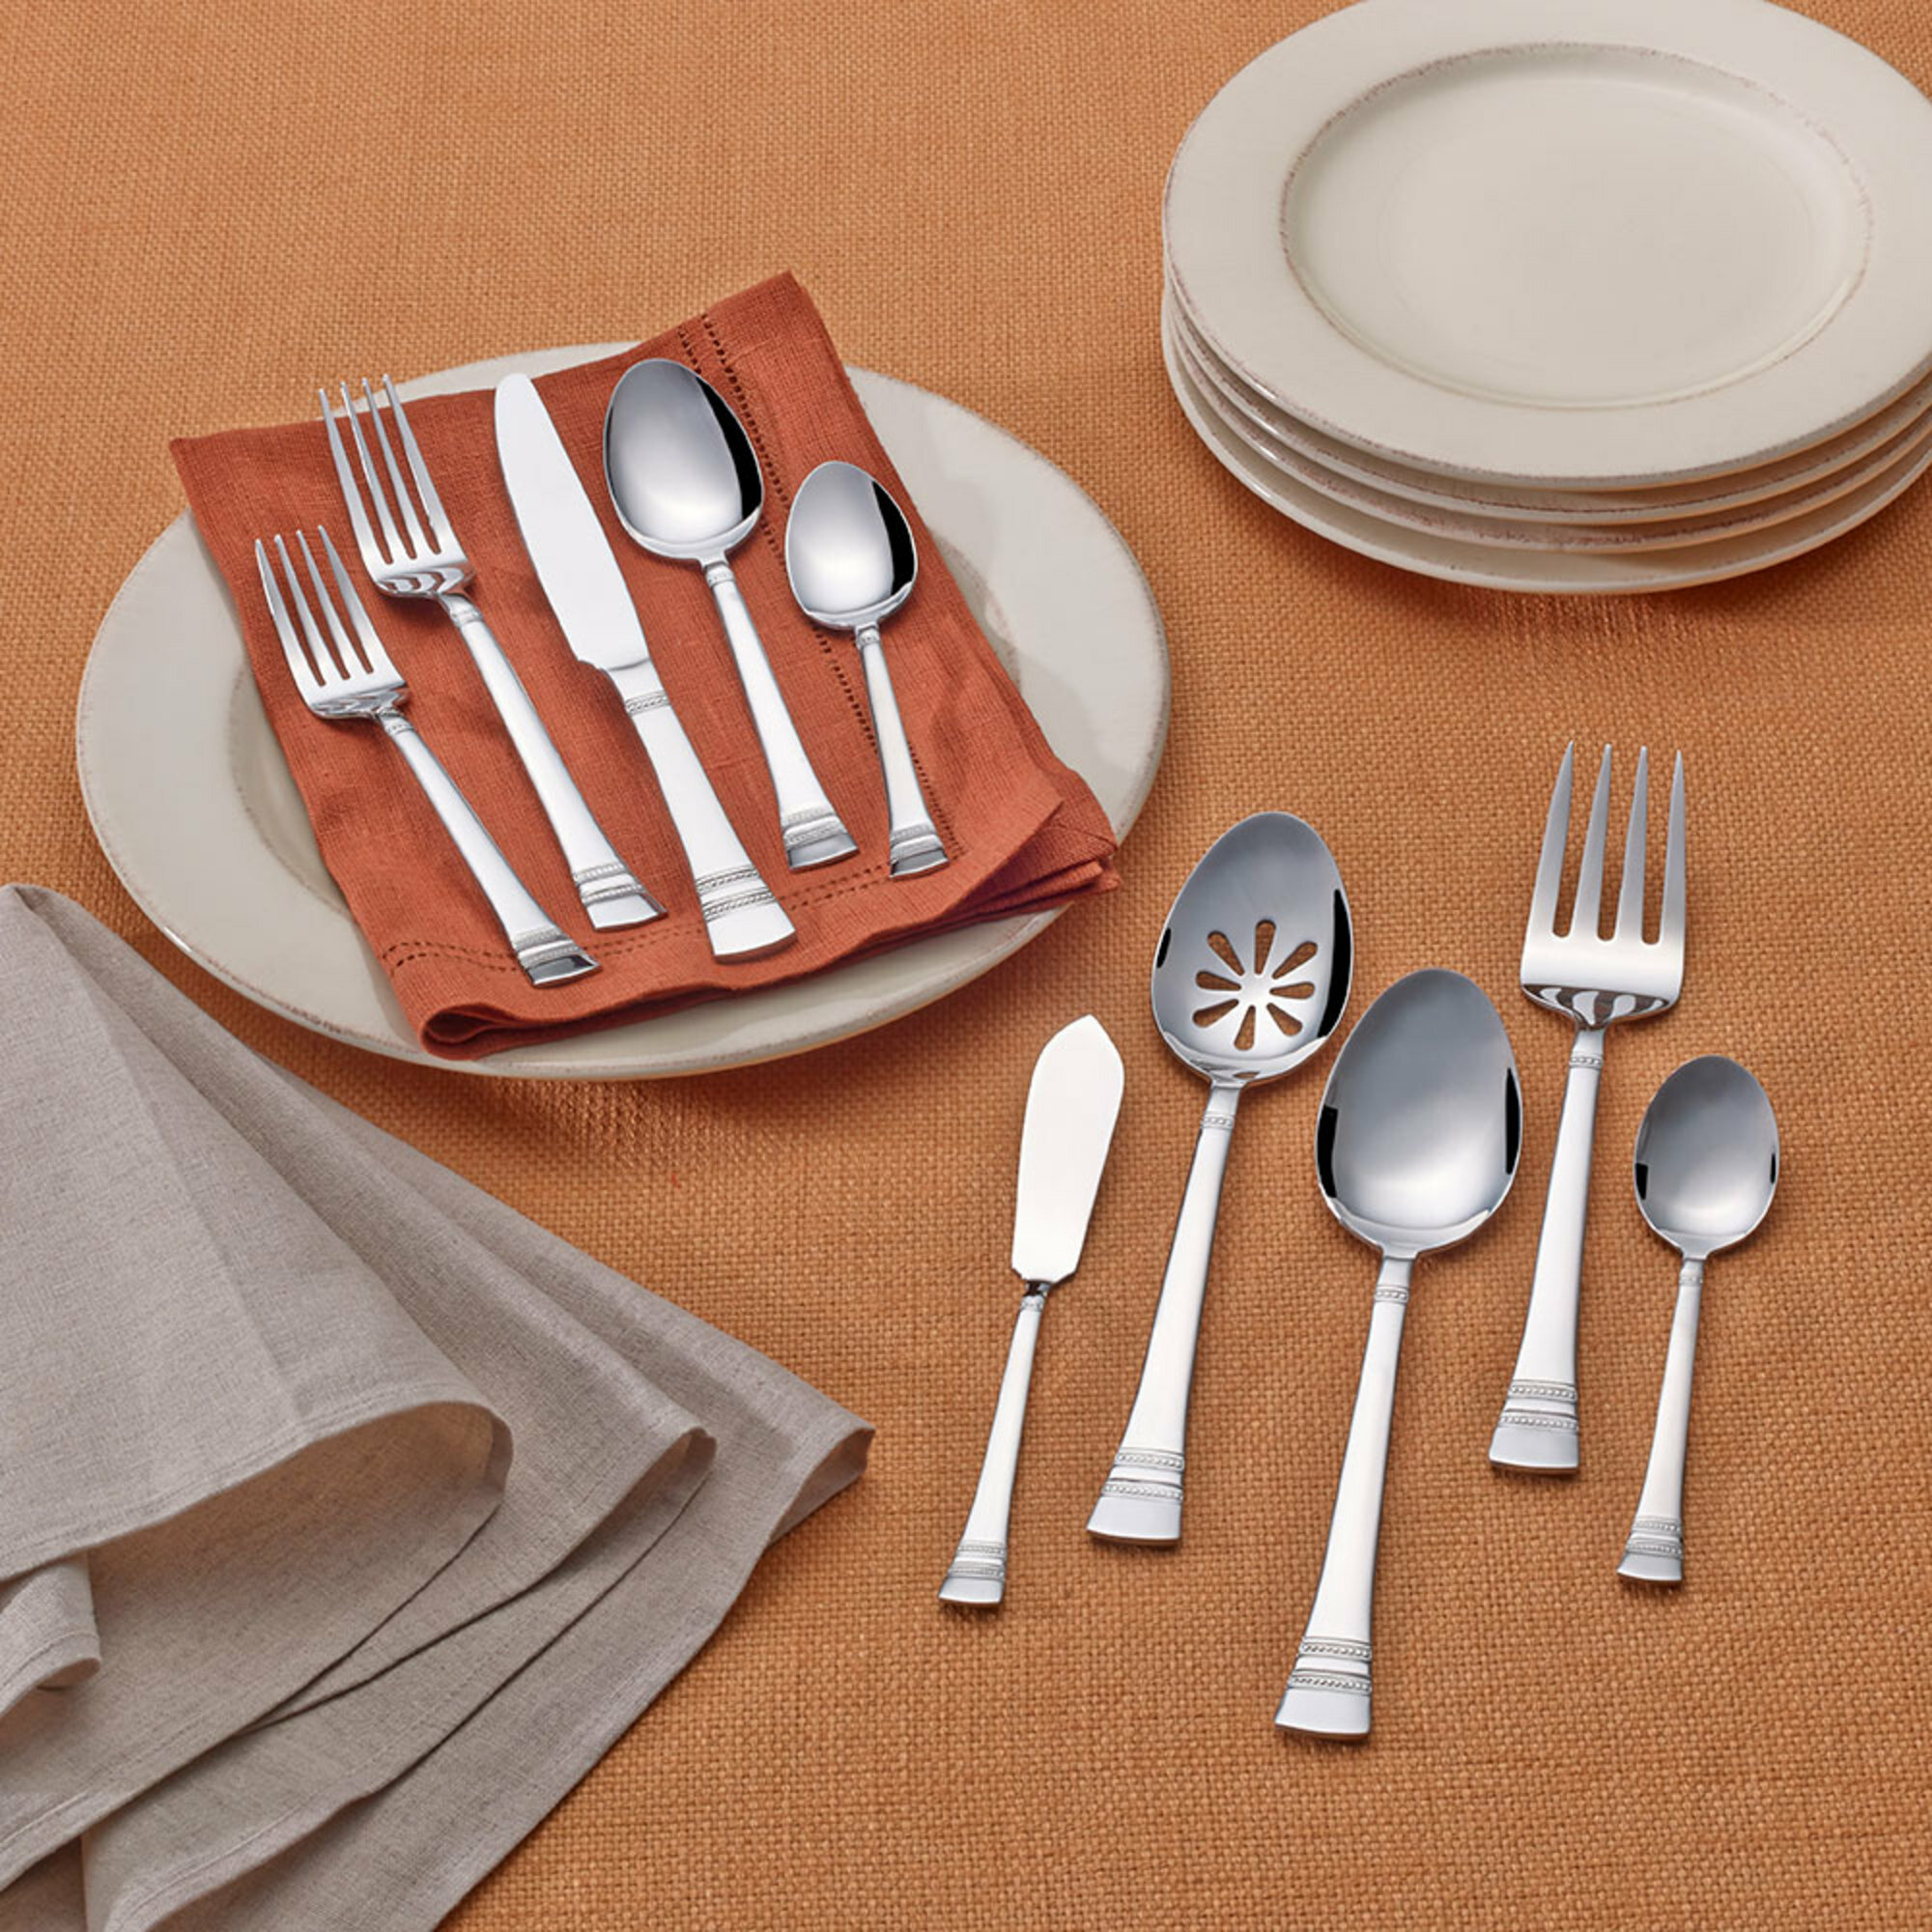 Top Rated Flatware Sets 